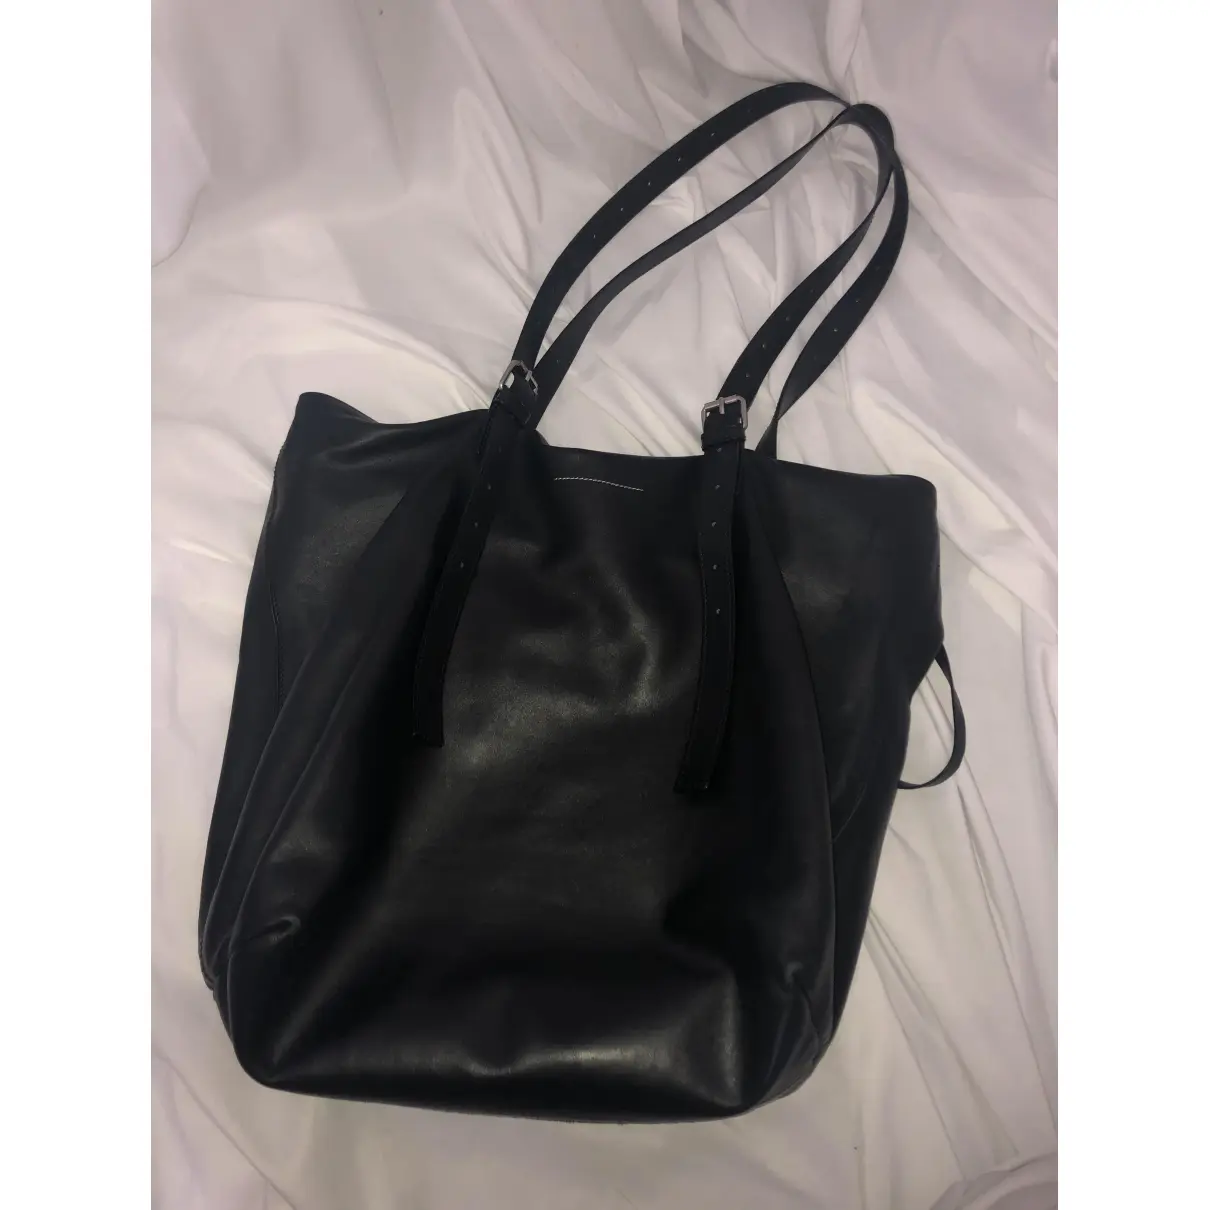 Buy MM6 Leather tote online